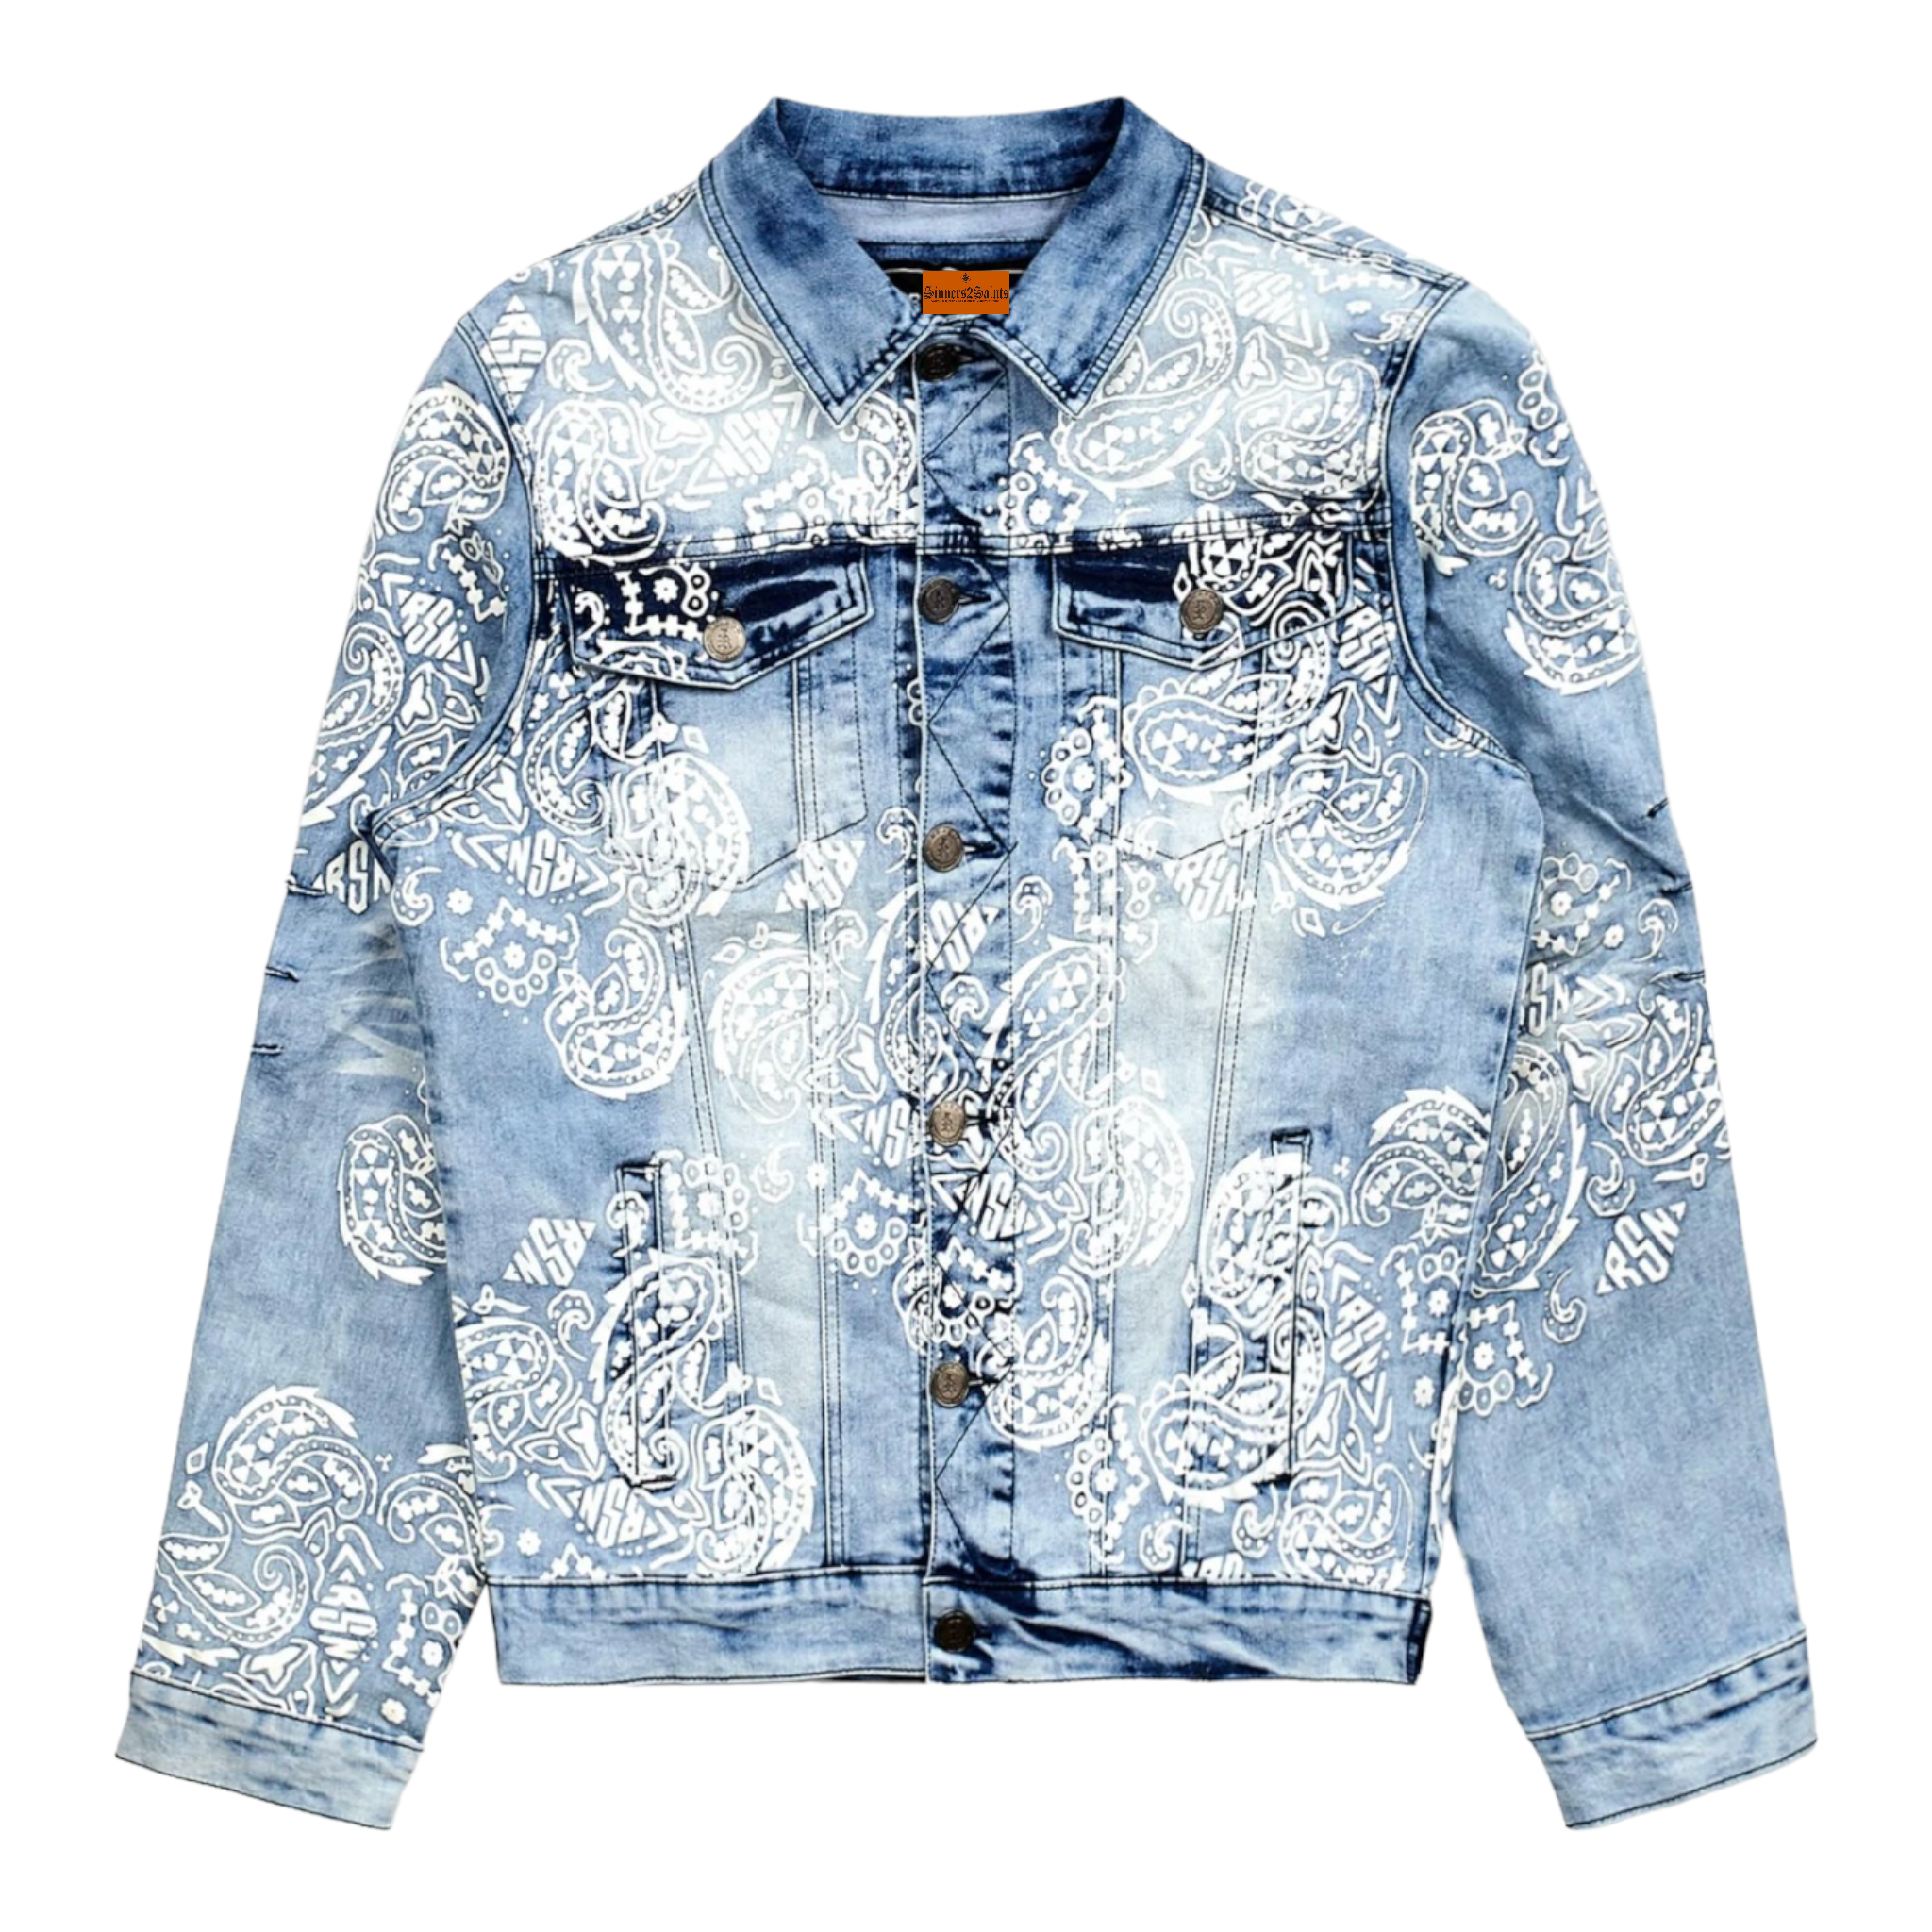 Buy Blue Denim Jean Jacket With Patches Bleach Treatment With Tri Color  Paint Splatter Embellishment Coca Cola Inspired Jean Jacket Online in India  - Etsy